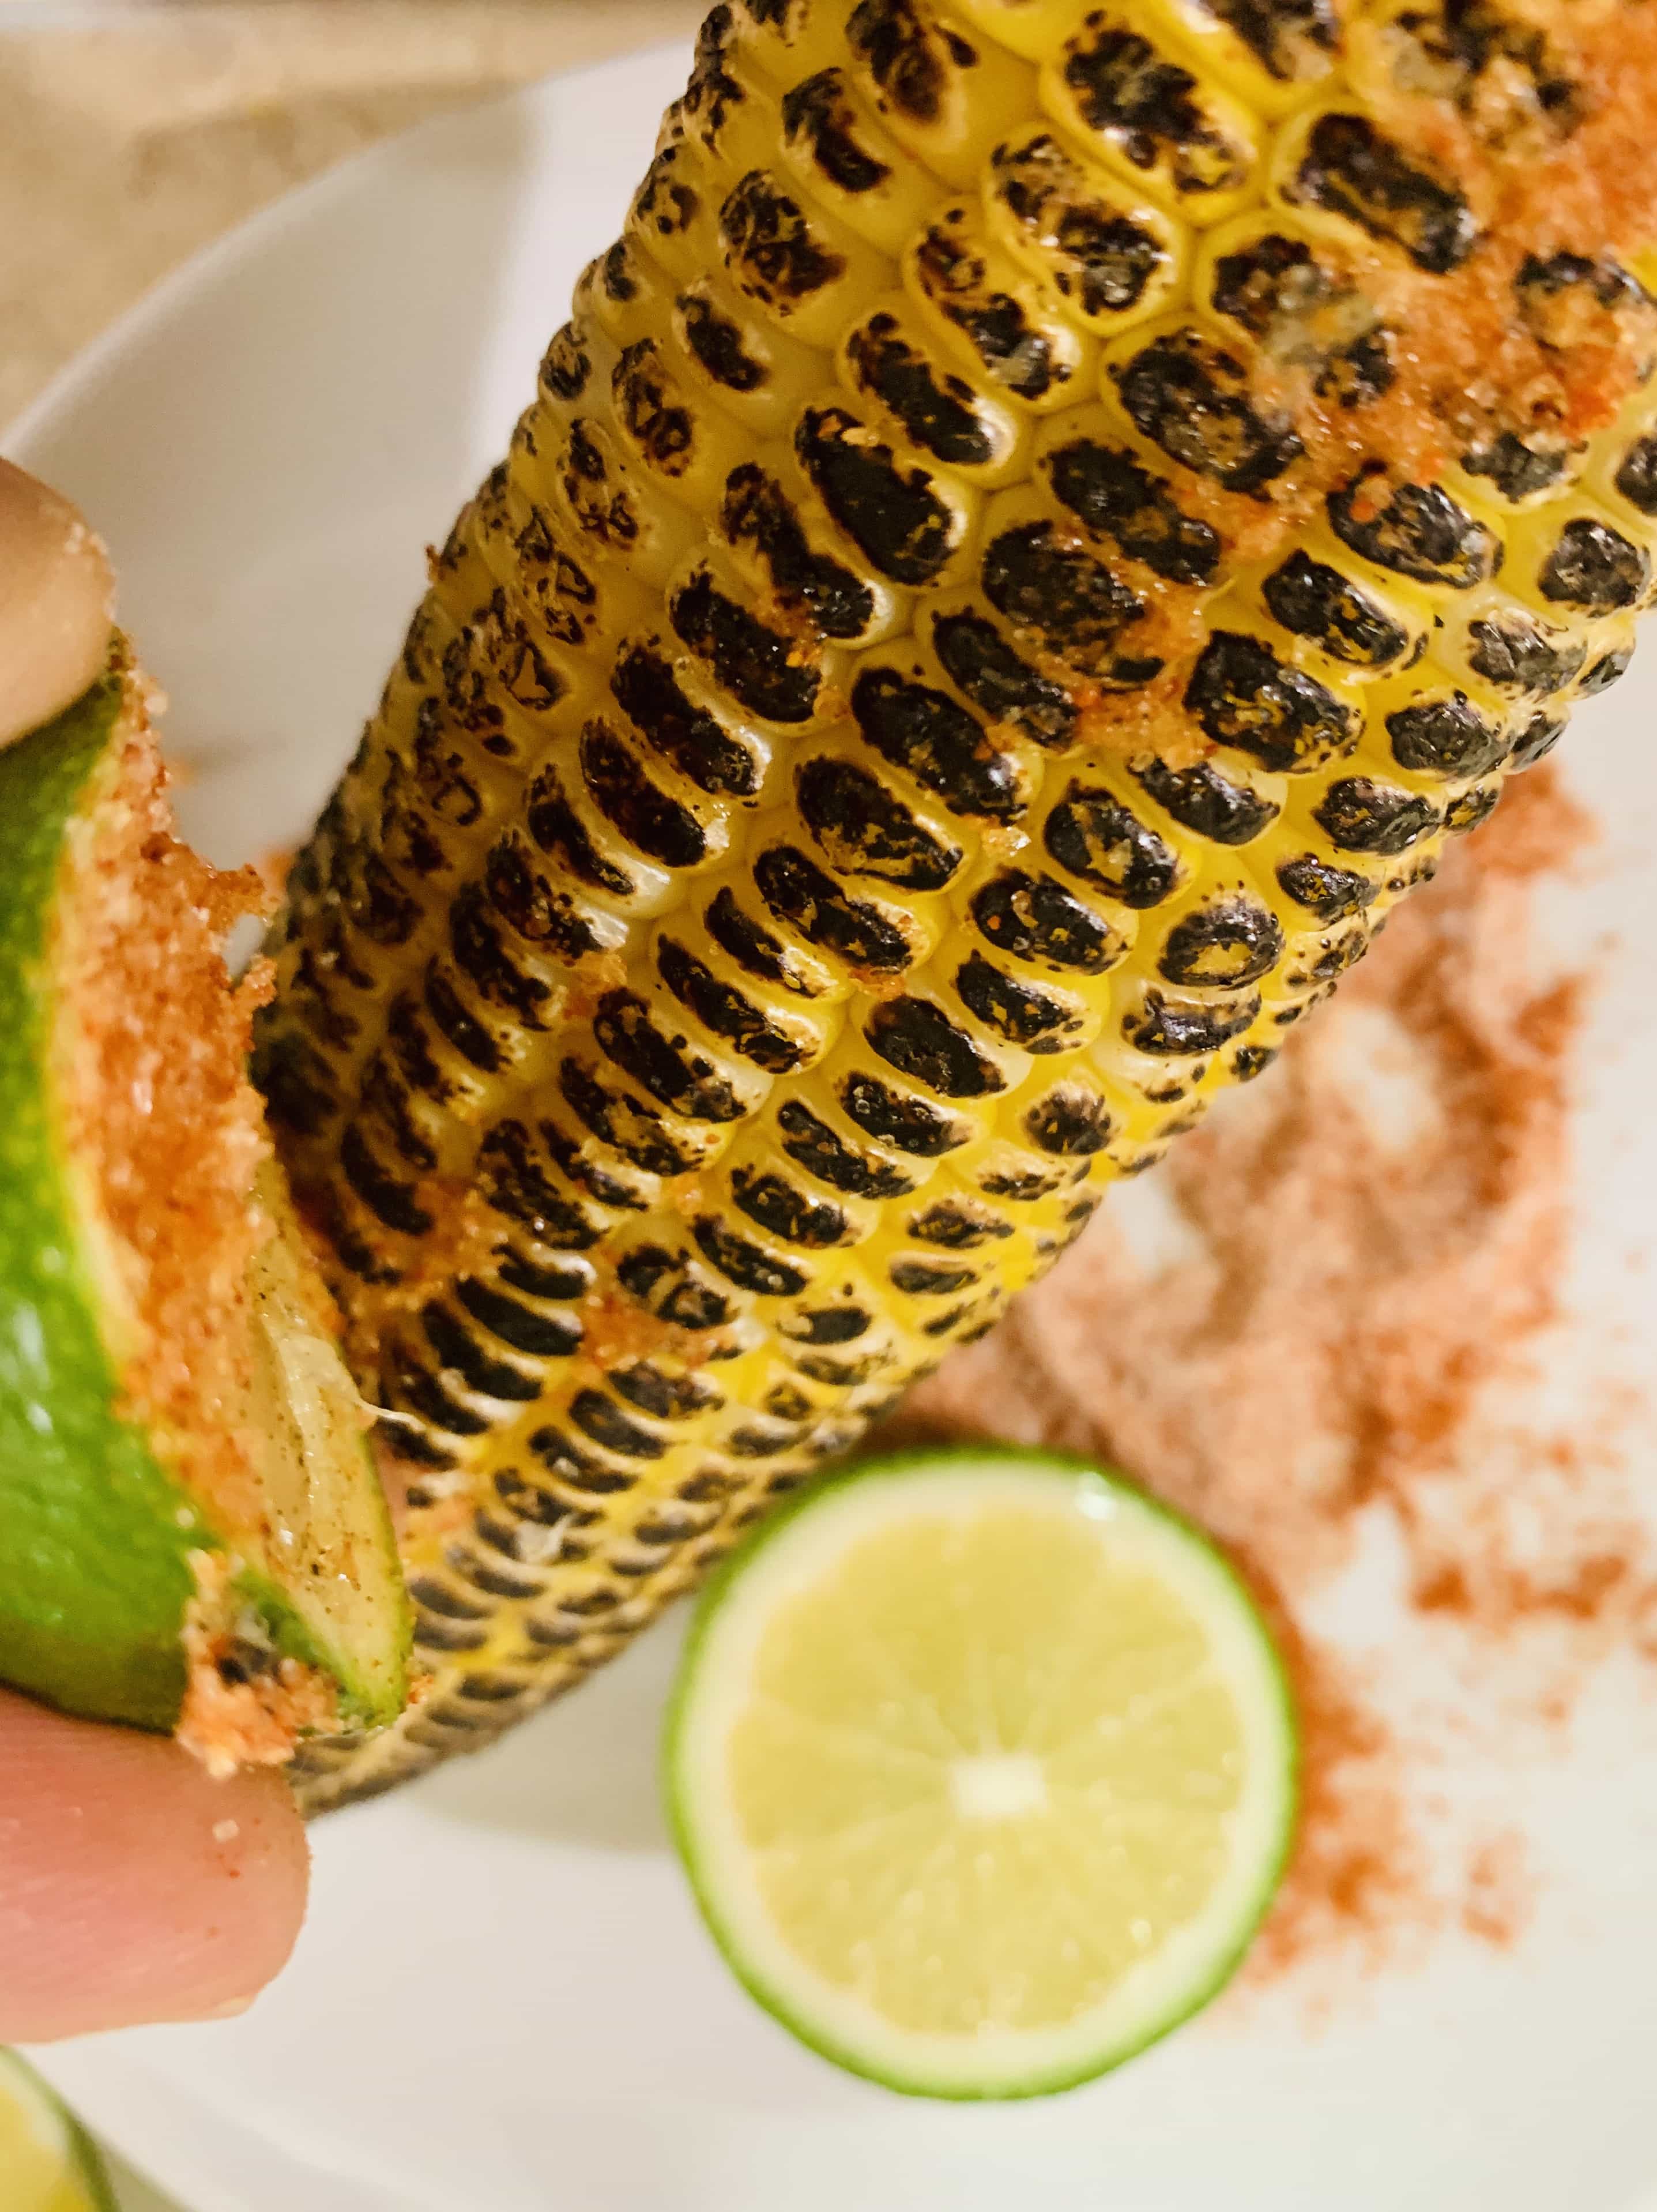 bhutta with creme brulee torch or a grilled corn or bhutta or kanis rubbed with lemon dipped in salt and chili powder